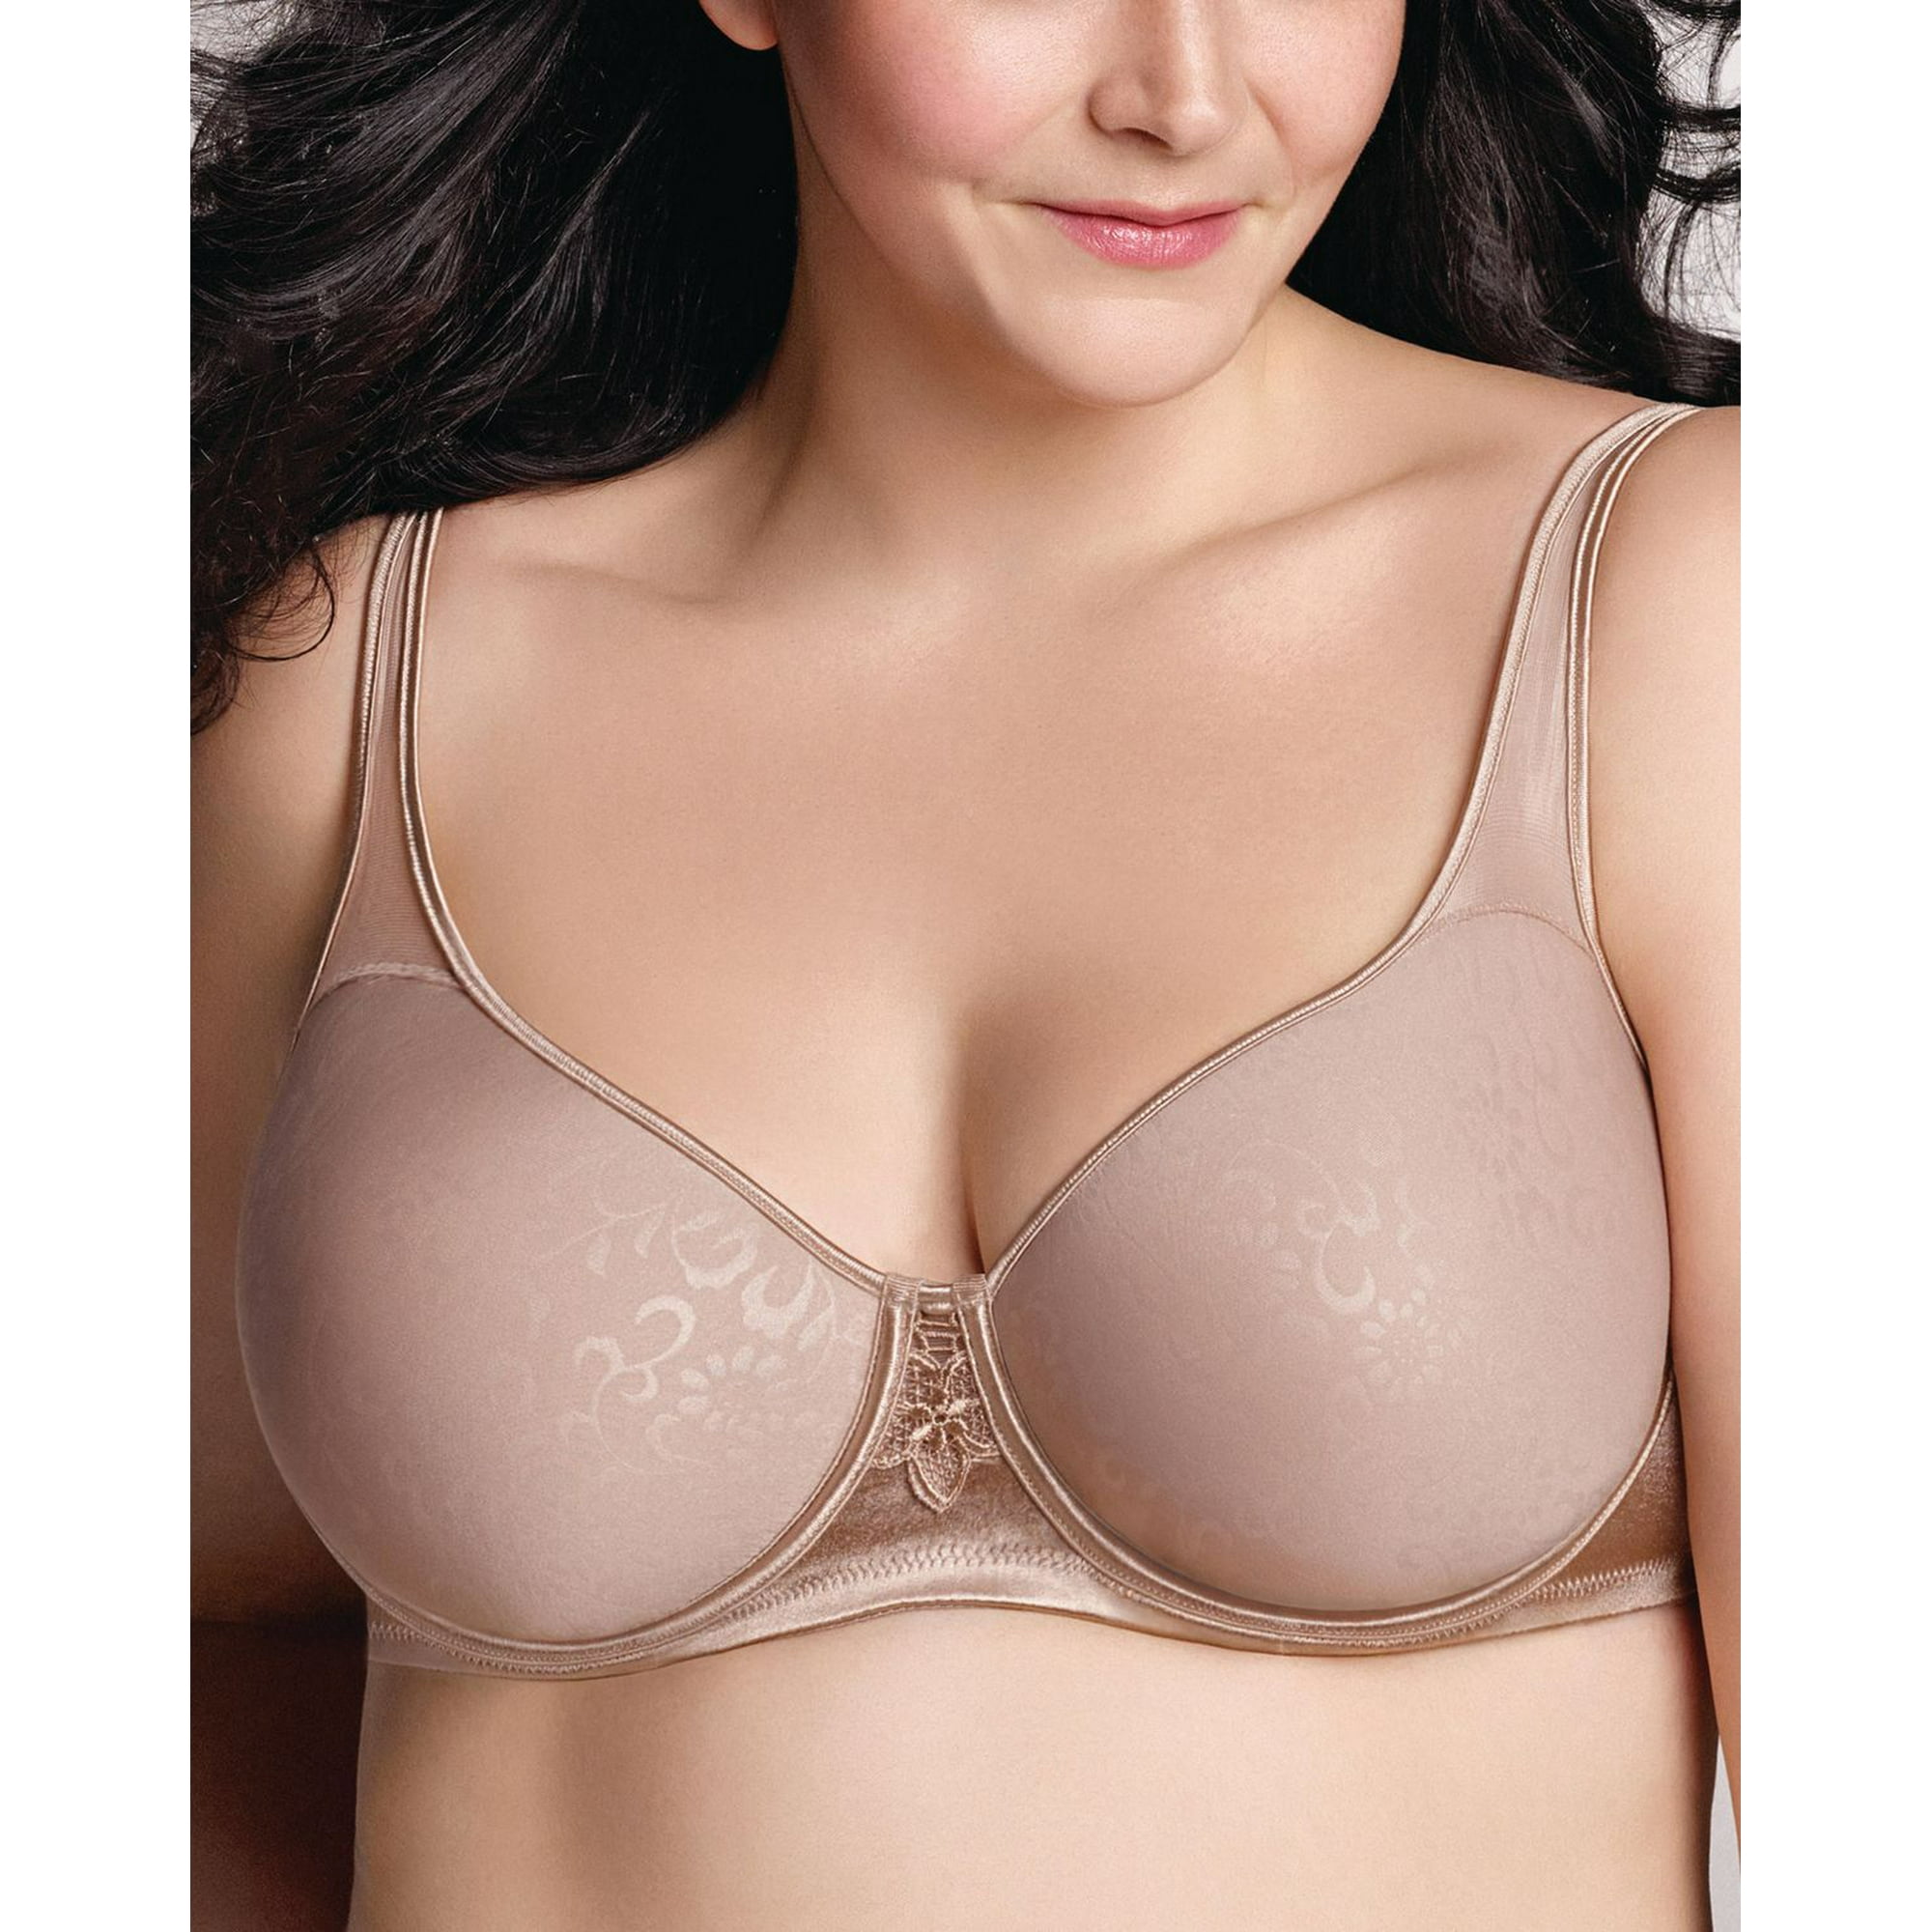 I Wear a 38DD Bra, and I Finally Found a Strapless Style That's